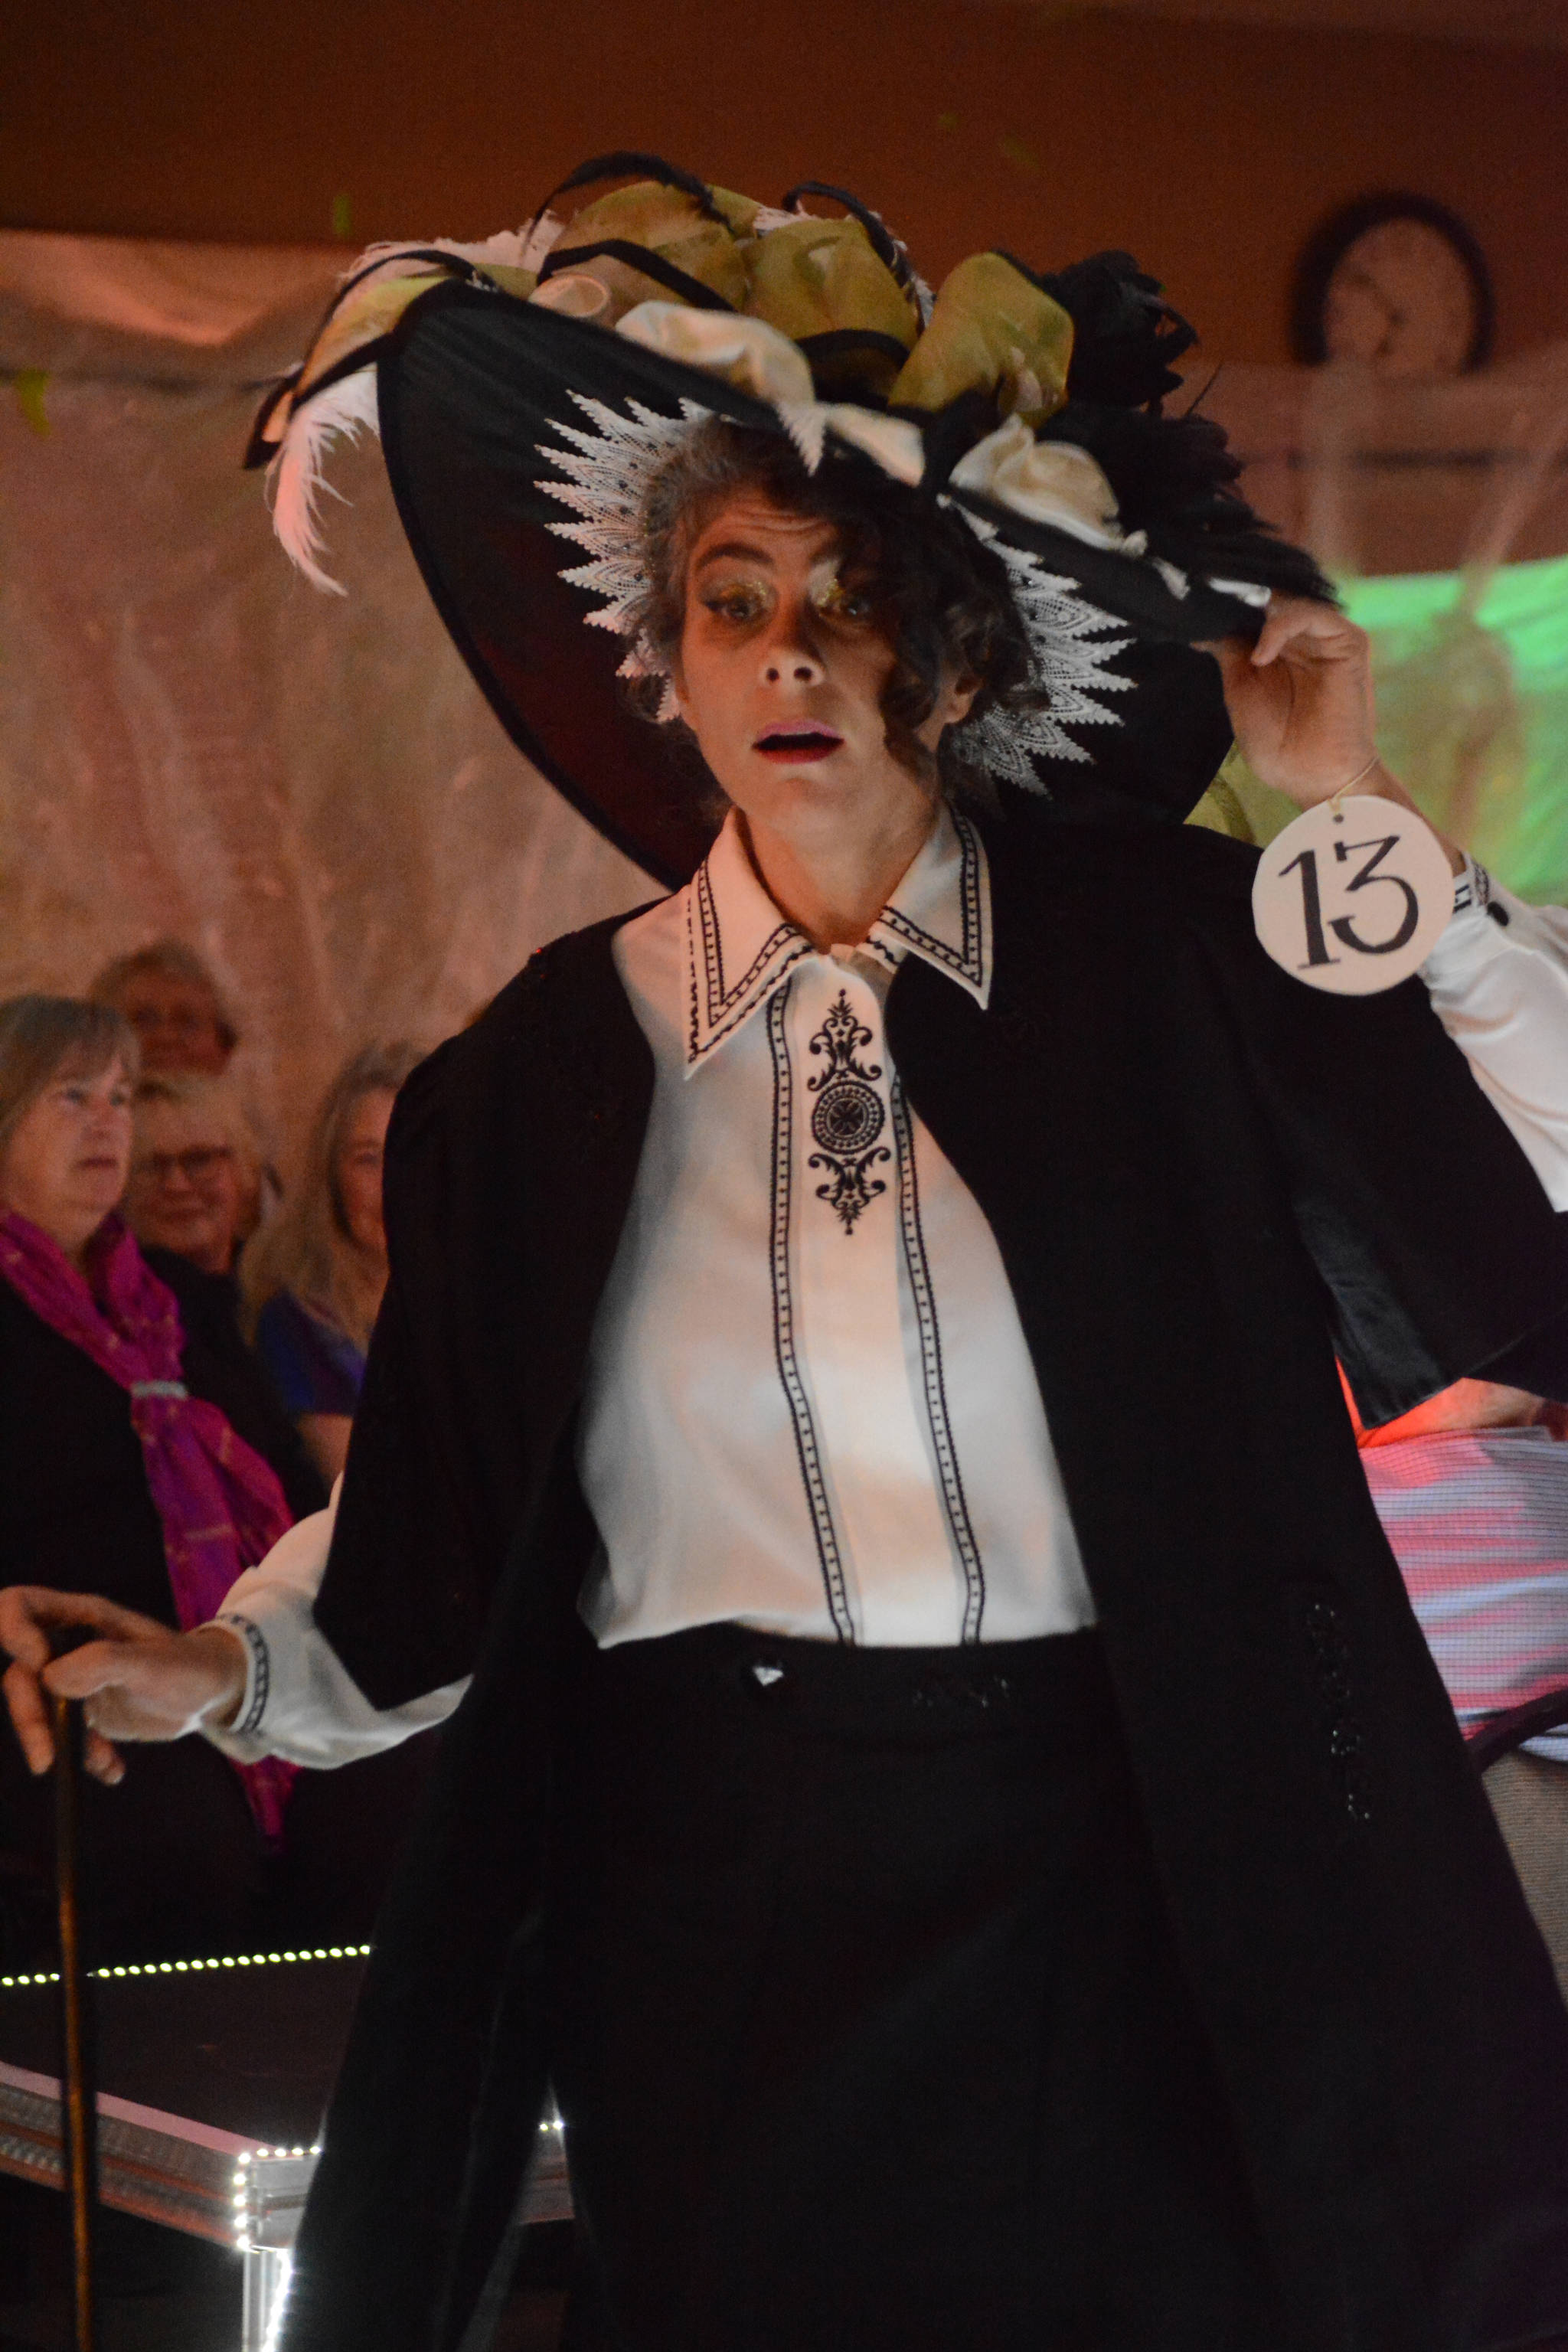 Christine Kulcheski models “Time Walker” by Marie Walker, based on a photograph of her husband’s grandmother, at the 2018 Wearable Arts on Nov. 17, 2018, in Homer, Alaska. (Photo by Michael Armstrong/Homer News)